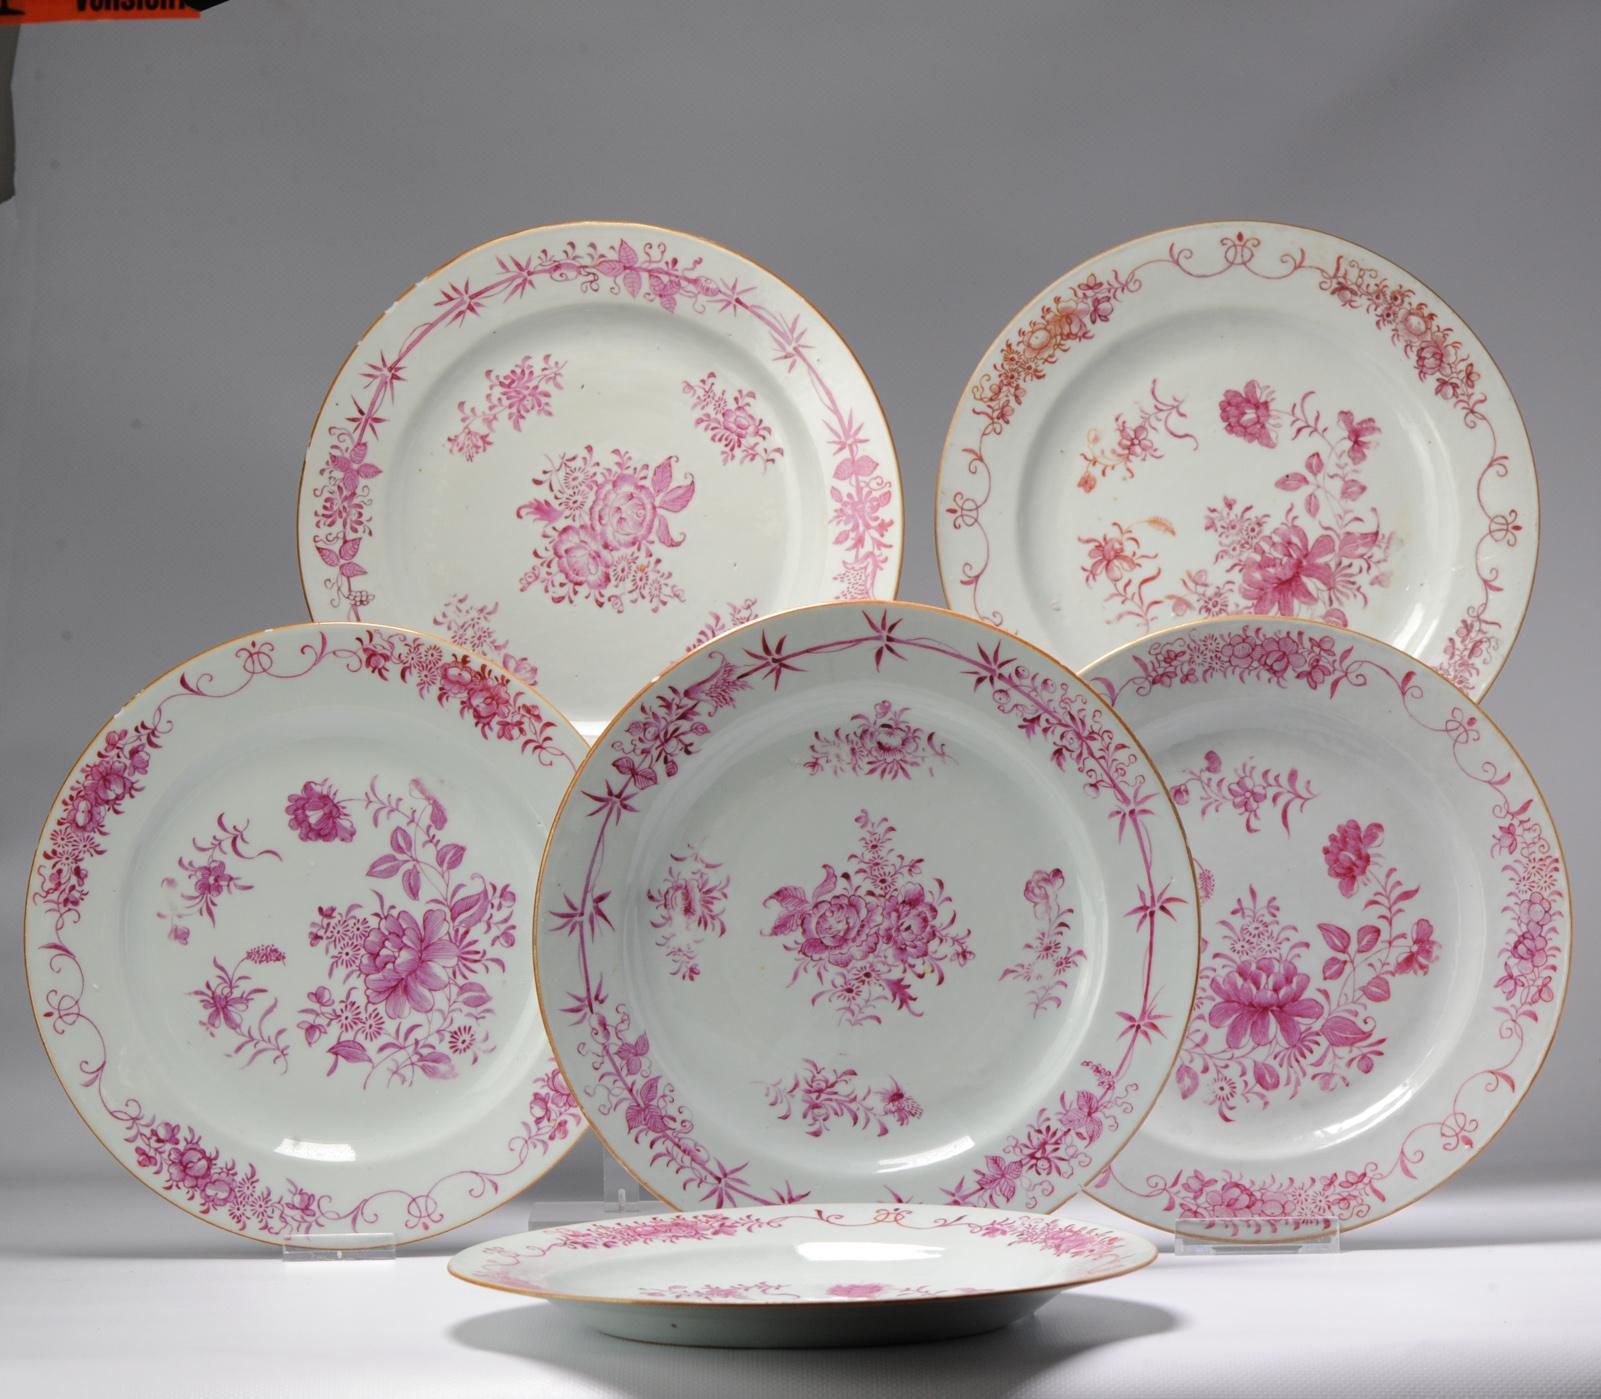 #5 Antique Chinese Porcelain 18th C Qianlong Period Famille Rose Dinner Plates For Sale 2